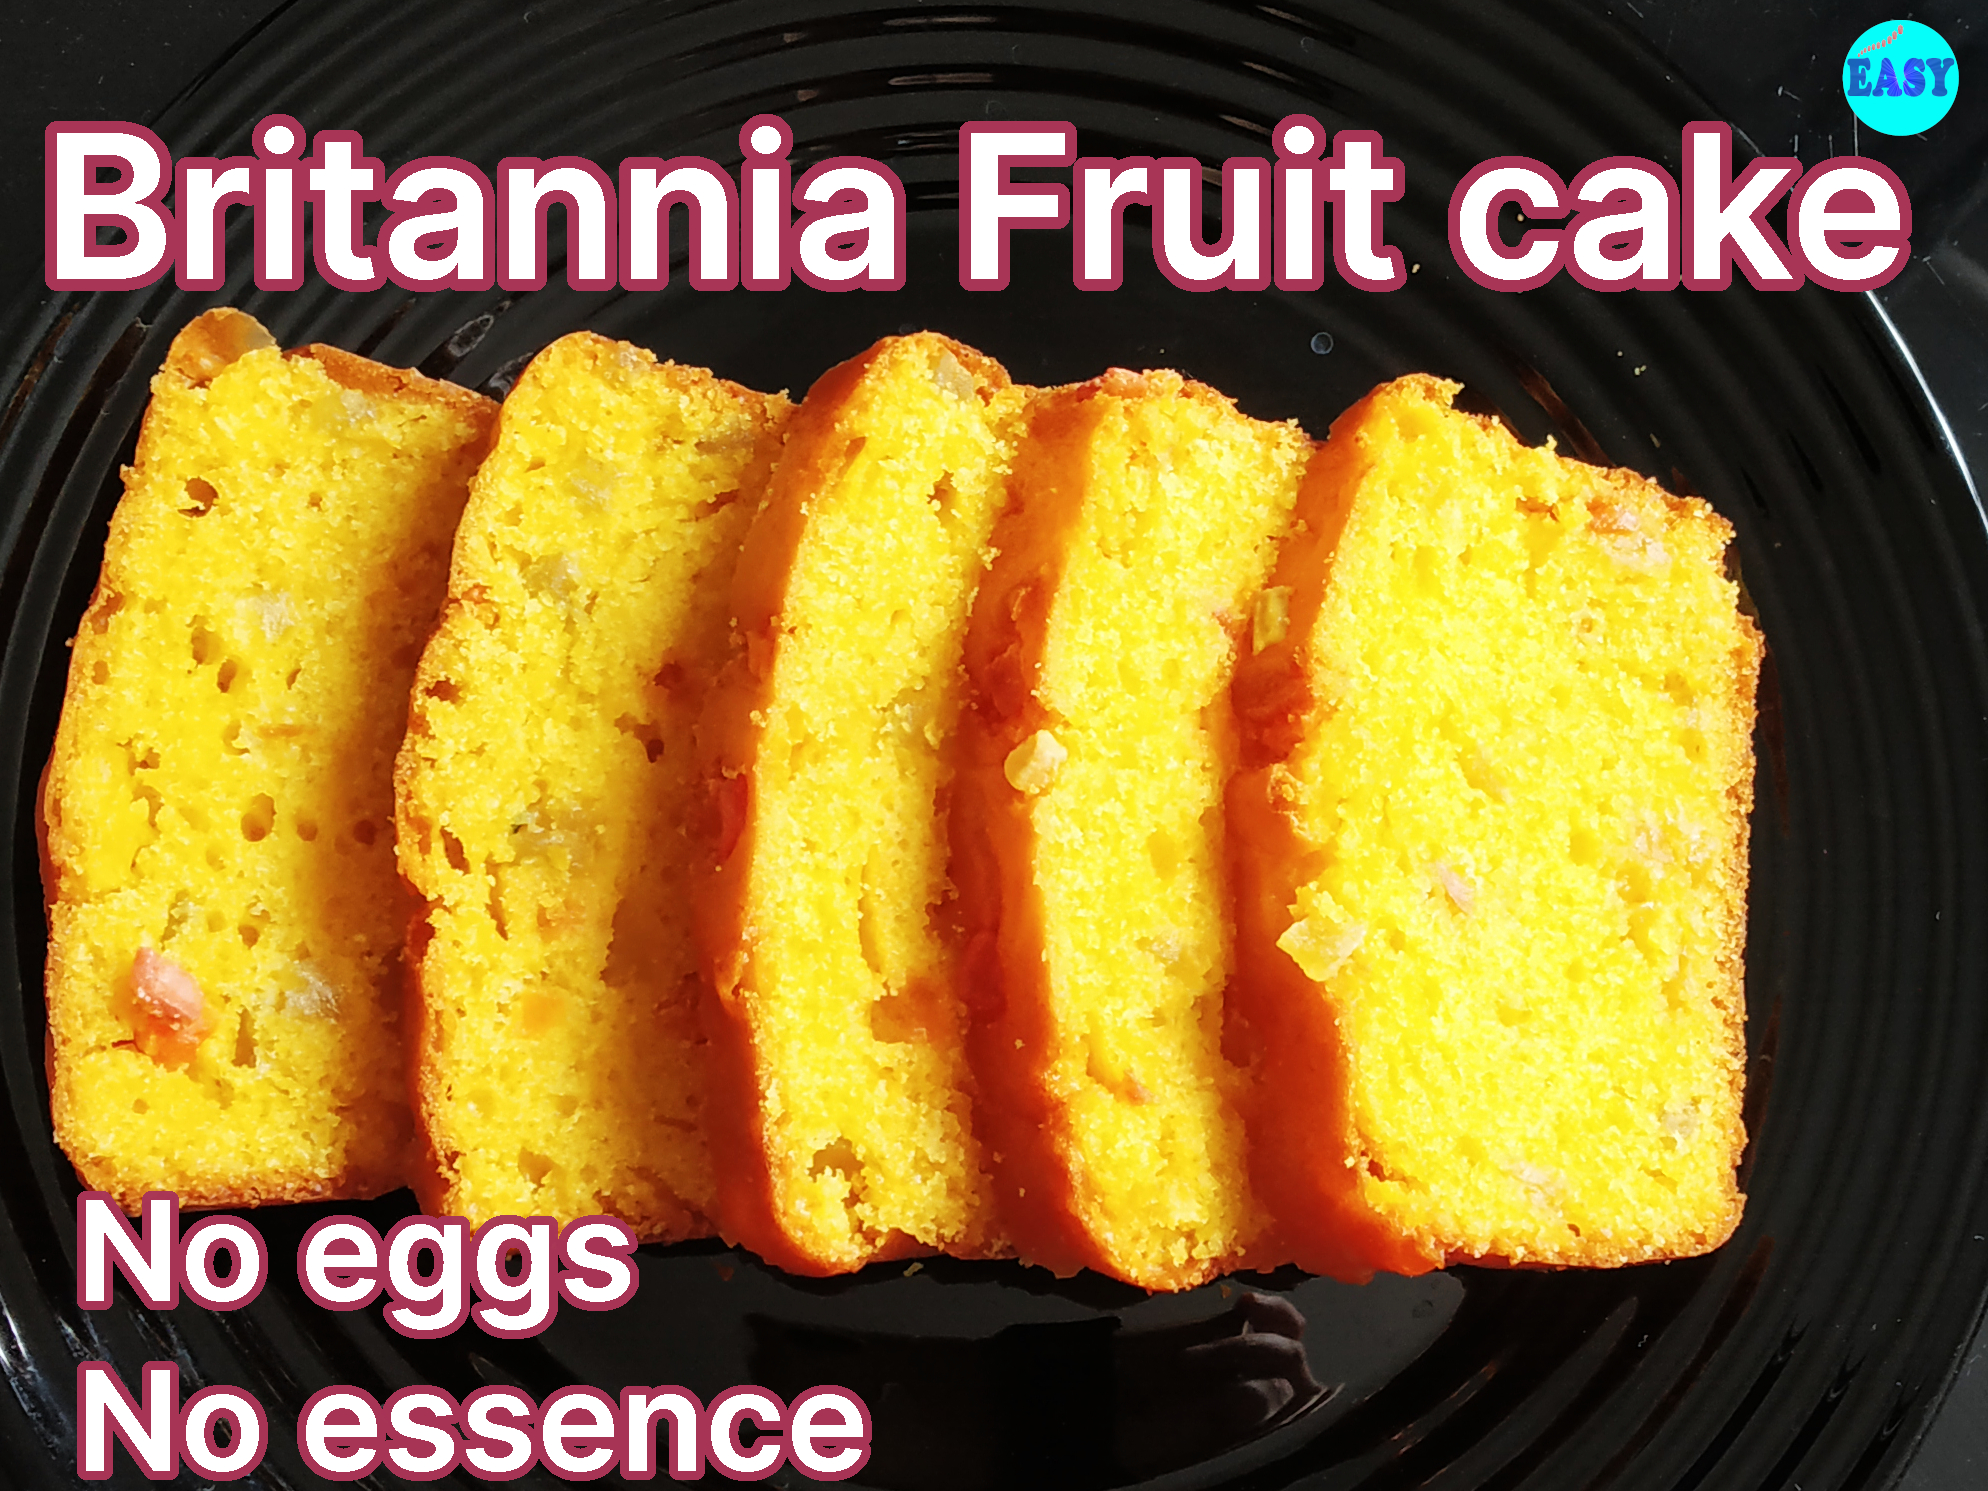 Buy britannia fruit cake online and get home delivery in 45 min | Dunzo